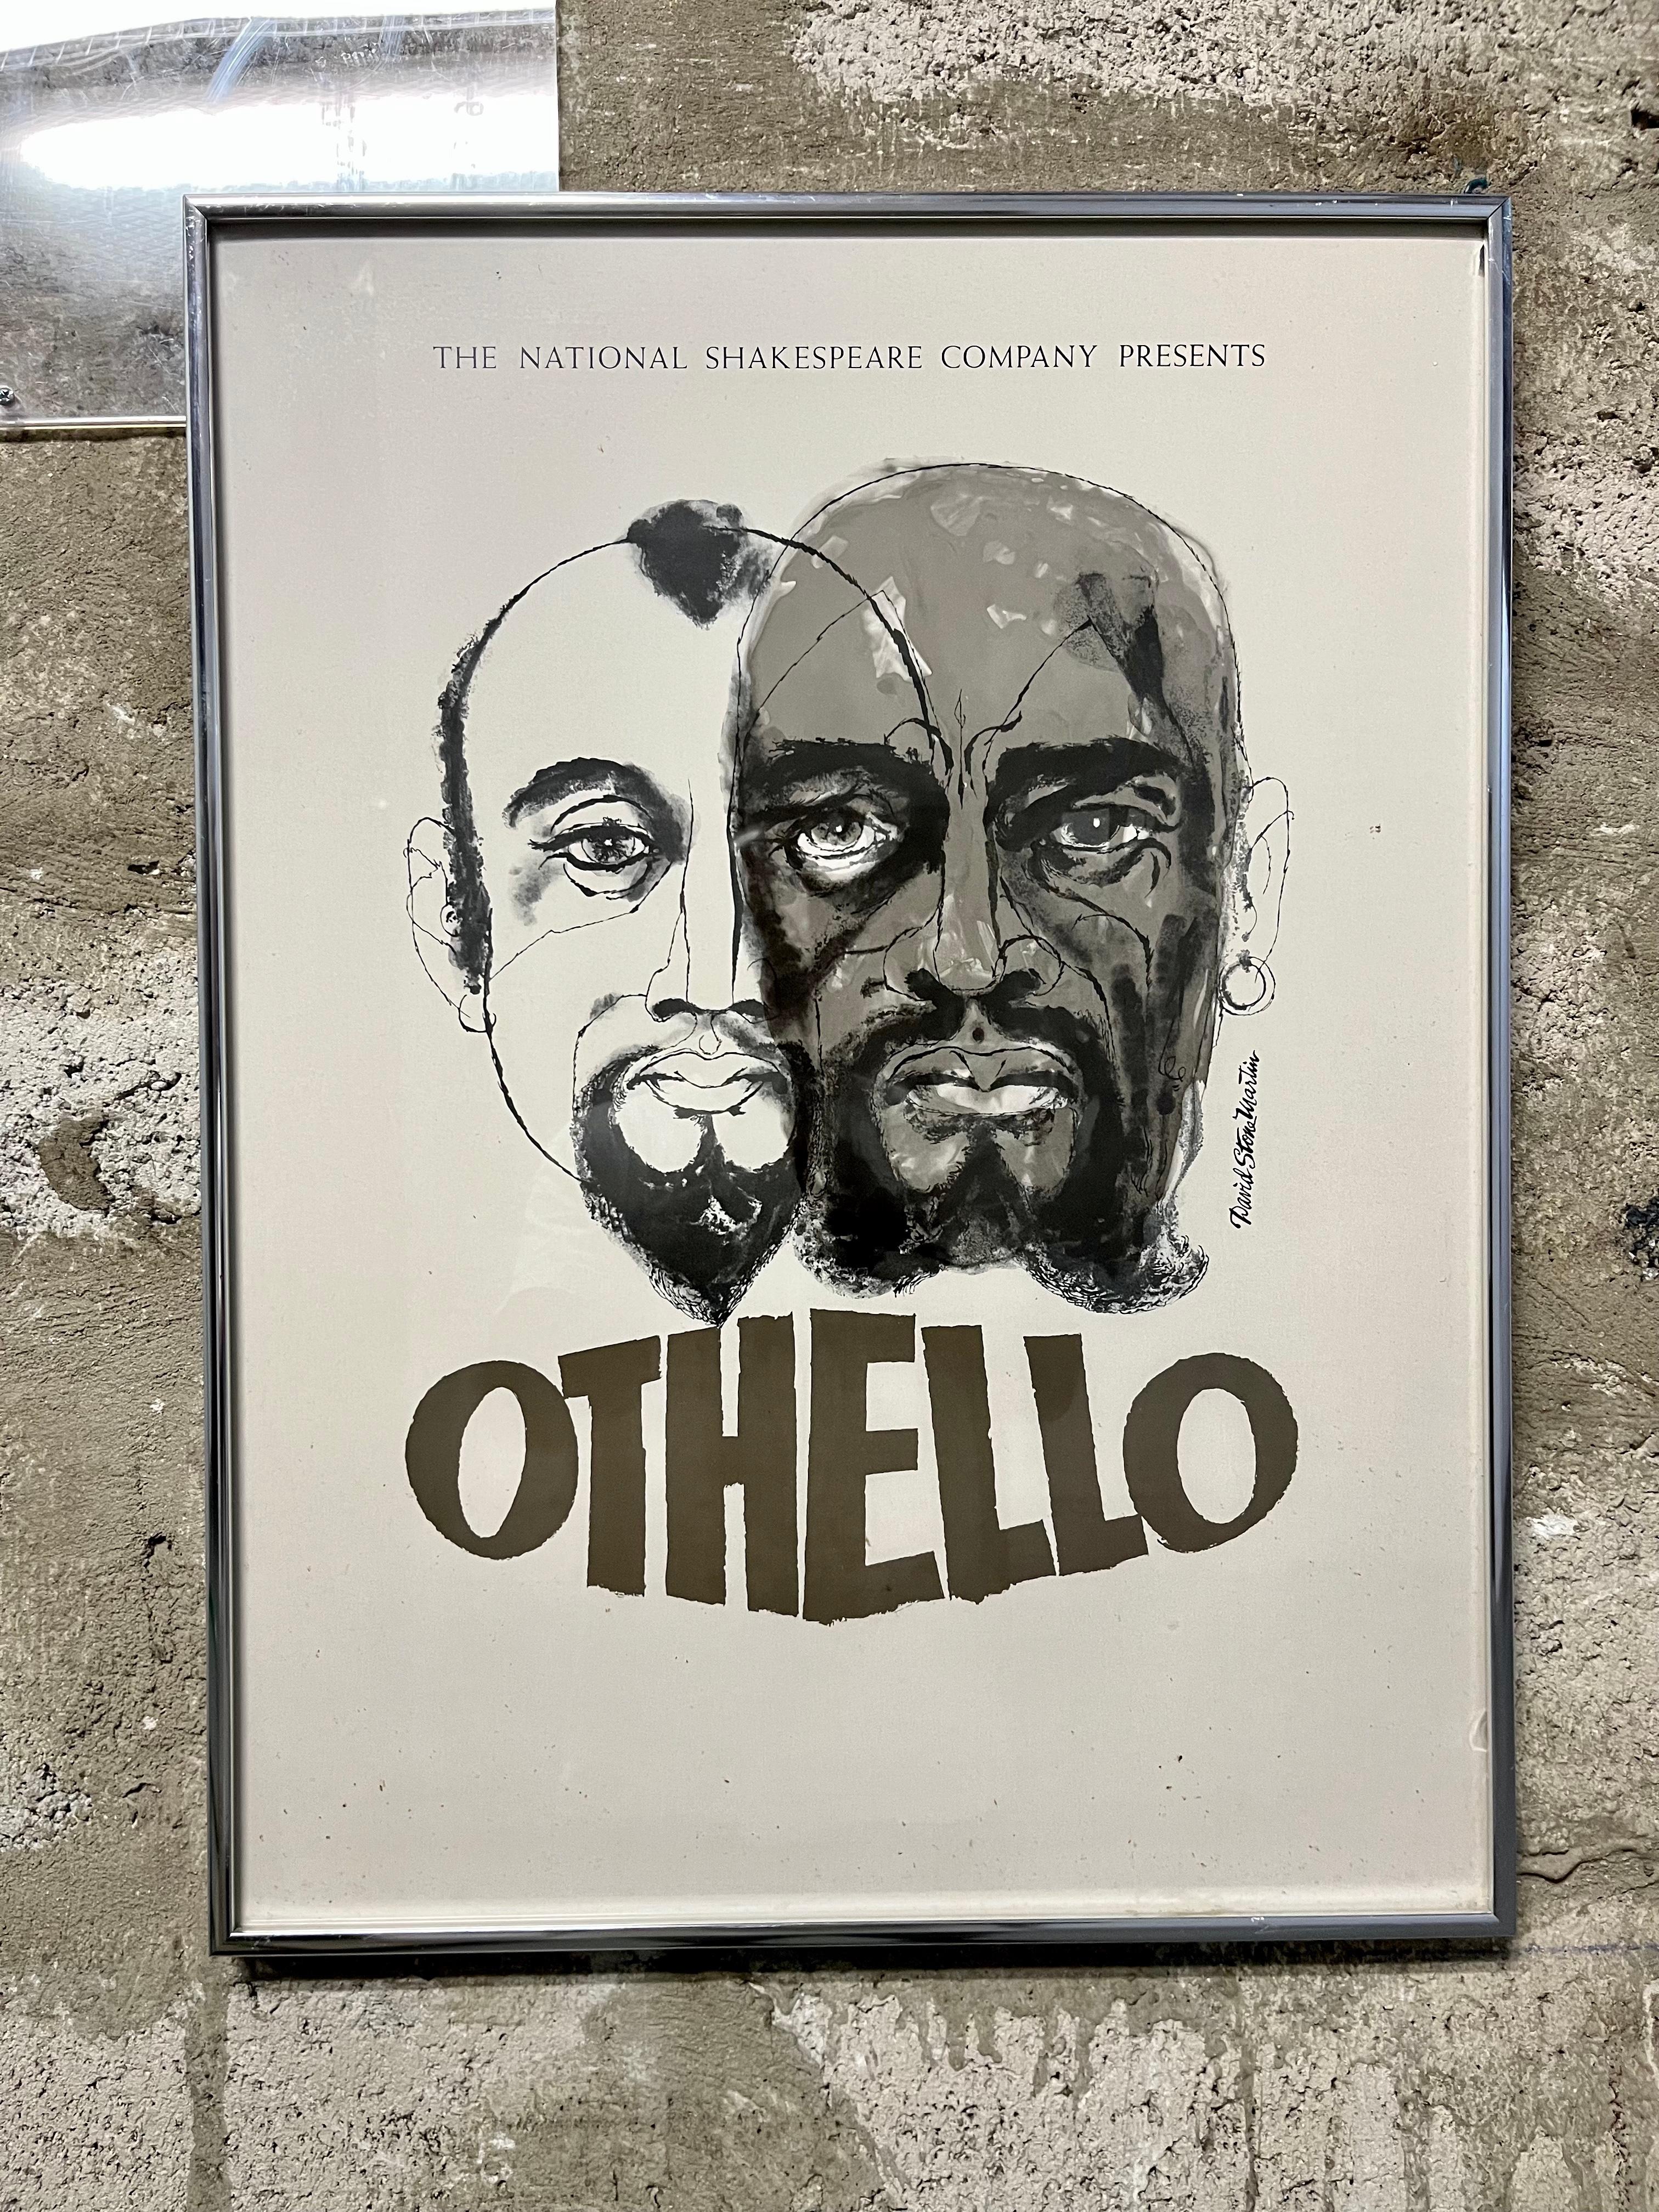 Mid-Century Modern Vintage The National Shakespeare Company Presents-Othello Framed Poster. C 1970s For Sale